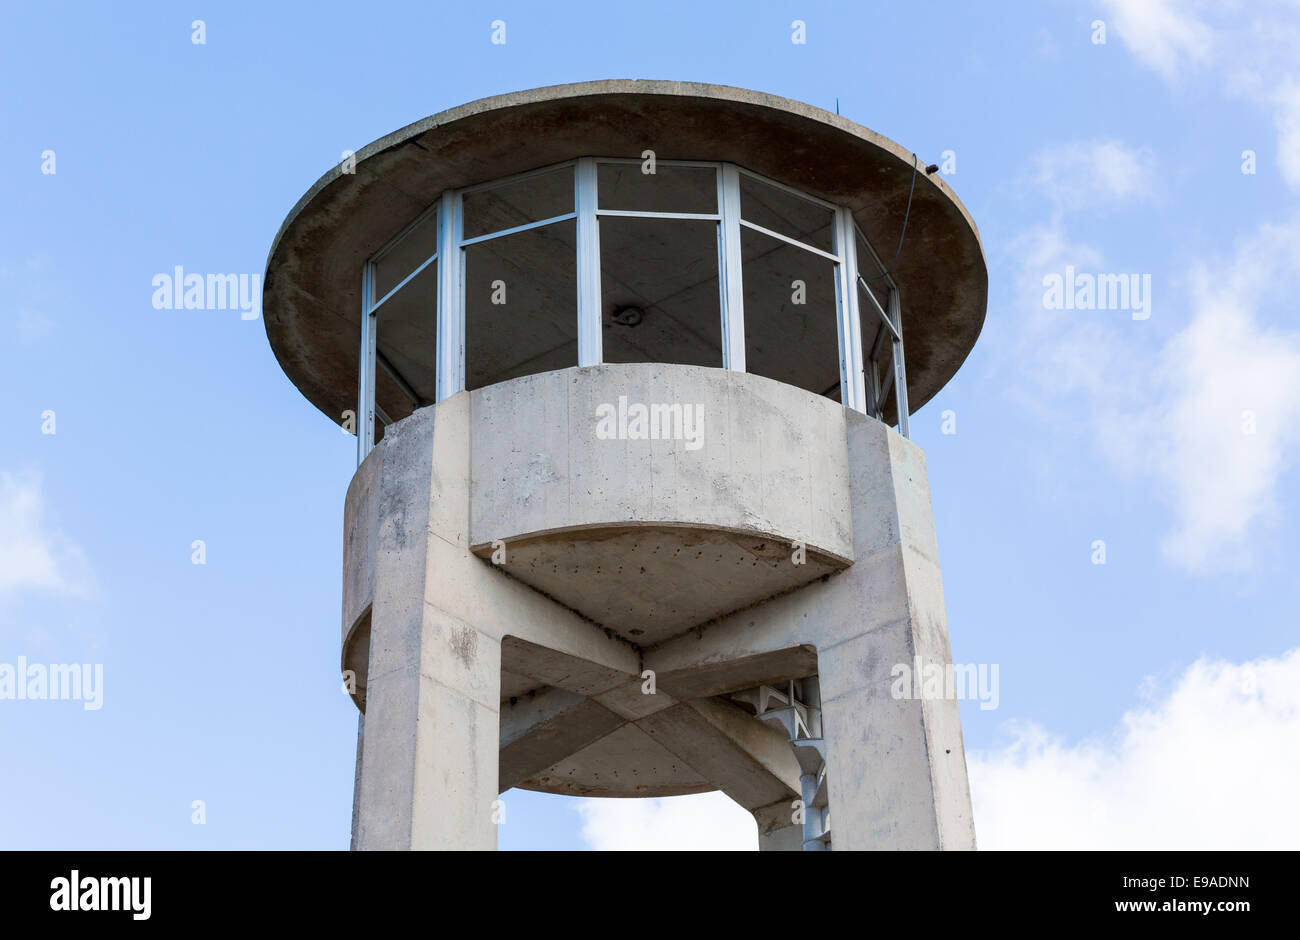 Concrete watch tower in Everglades Florida Stock Photo